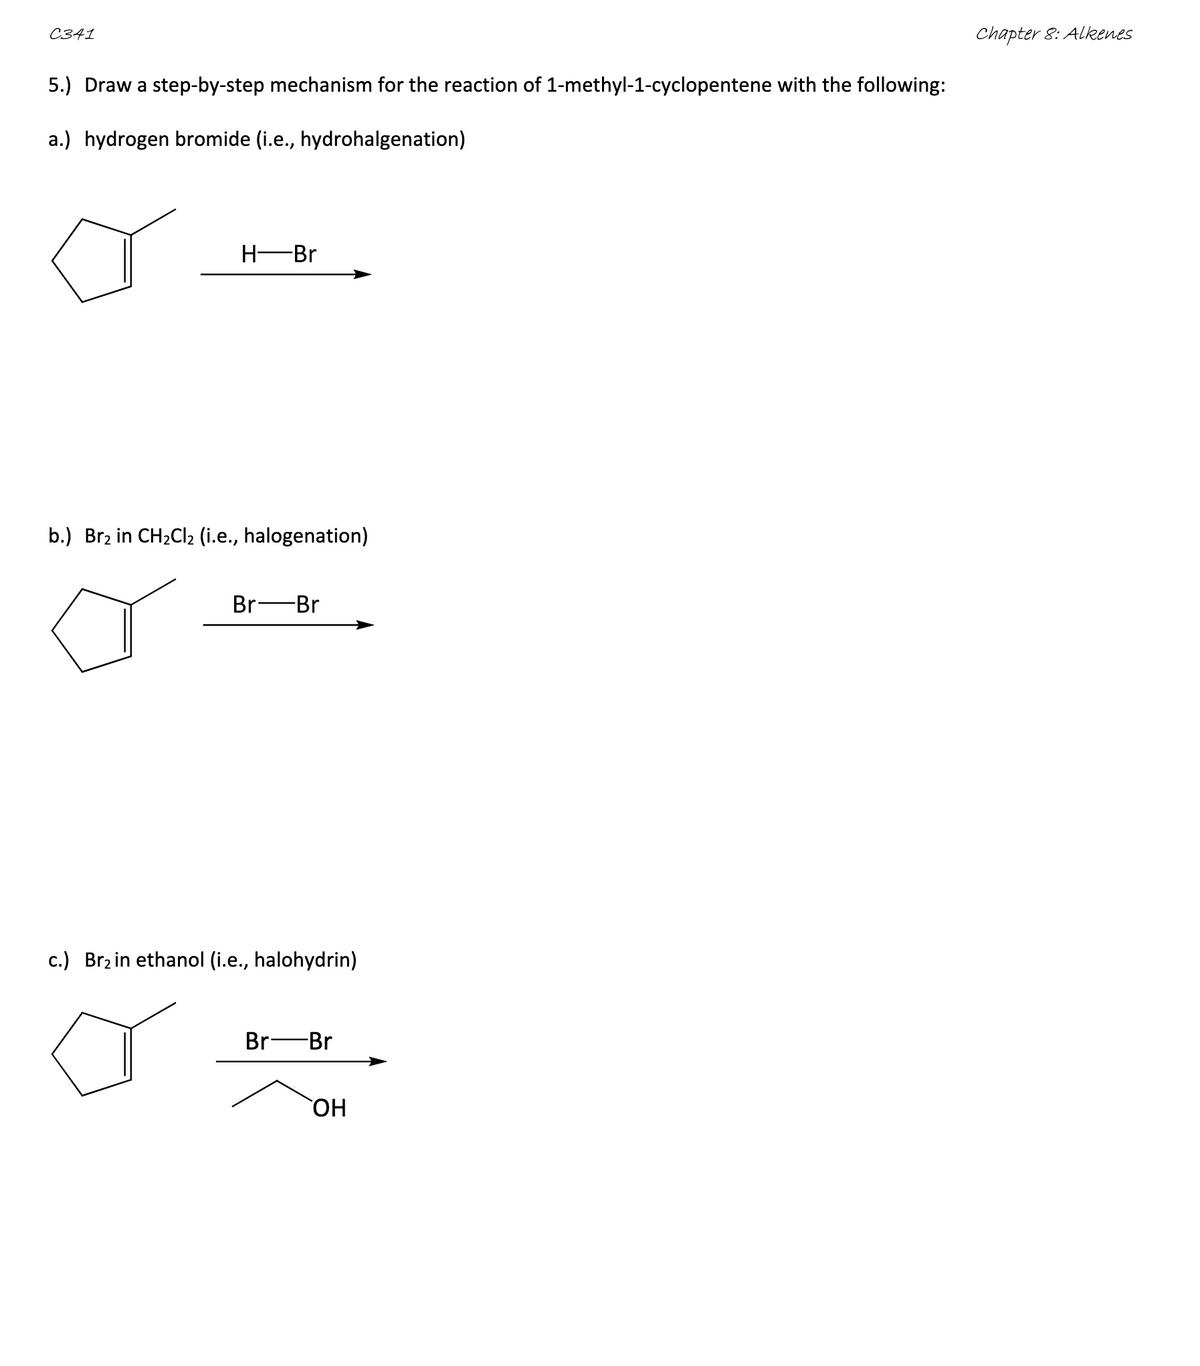 C341
5.) Draw a step-by-step mechanism for the reaction of 1-methyl-1-cyclopentene with the following:
a.) hydrogen bromide (i.e., hydrohalgenation)
H-Br
b.) Br2 in CH2Cl2 (i.e., halogenation)
Br-Br
c.) Br2 in ethanol (i.e., halohydrin)
Br Br
OH
Chapter 8: Alkenes